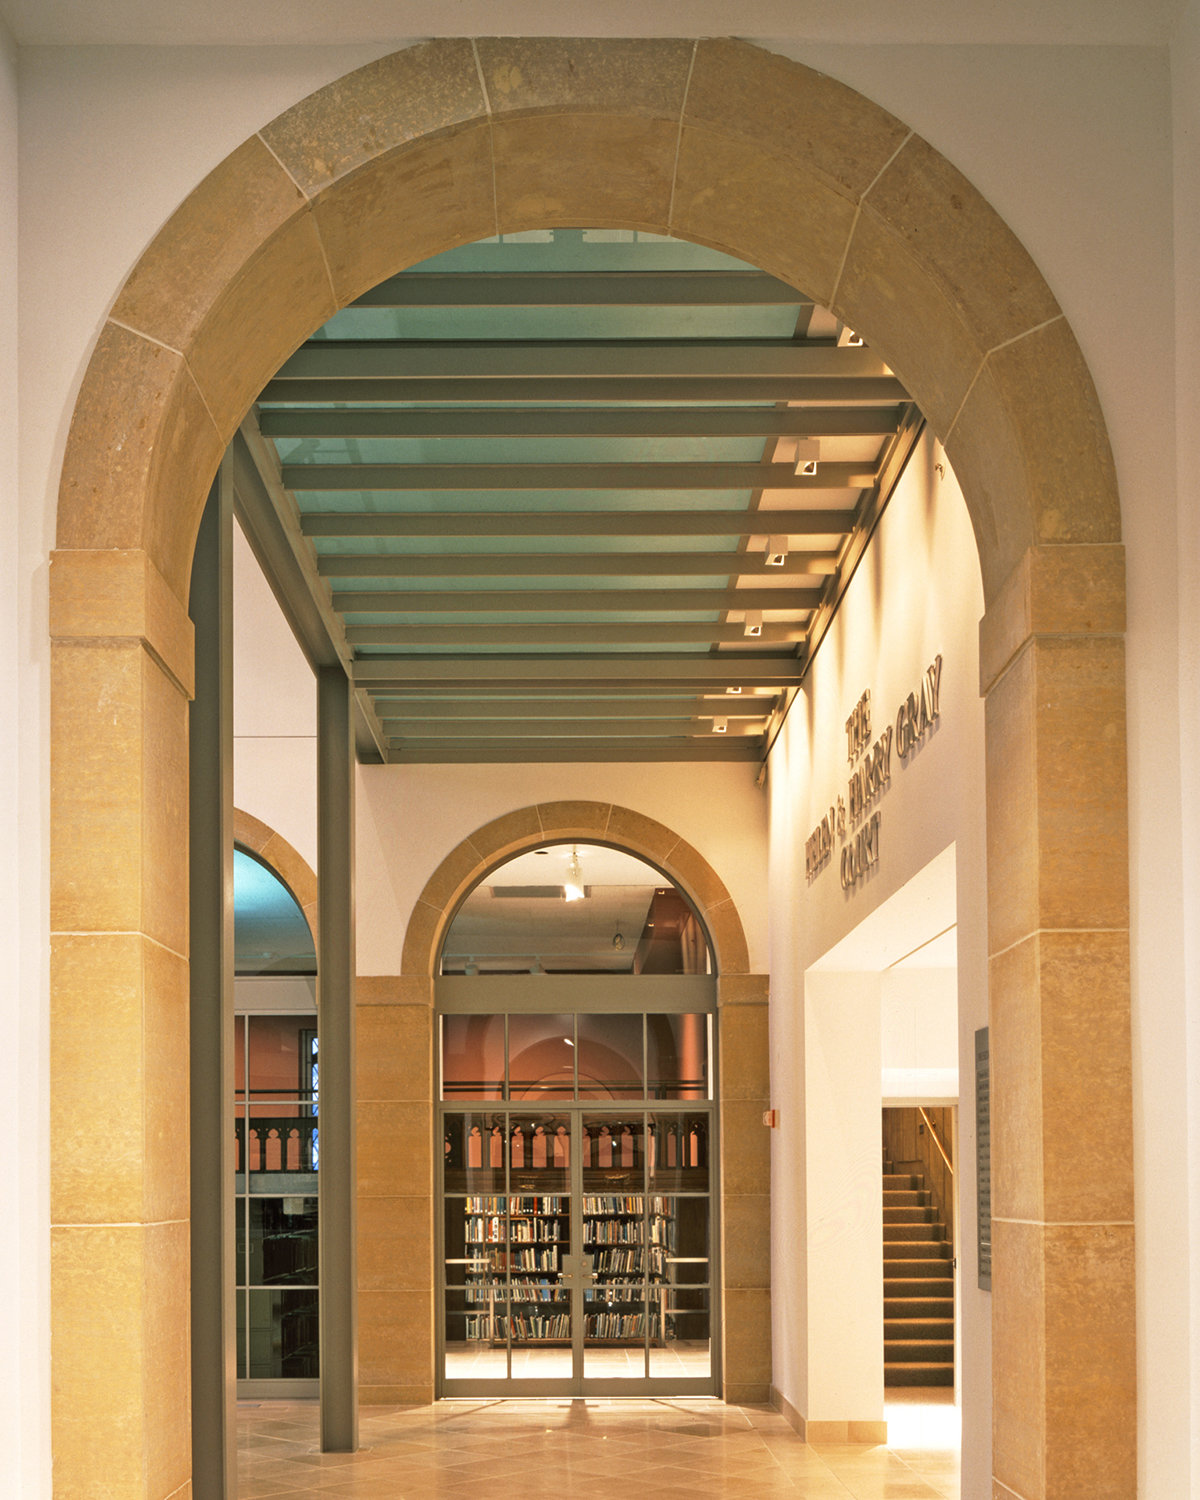 6 tskp wadsworth atheneum the helen and harry gray court limestone arches 1400 0x0x1200x1500 q85